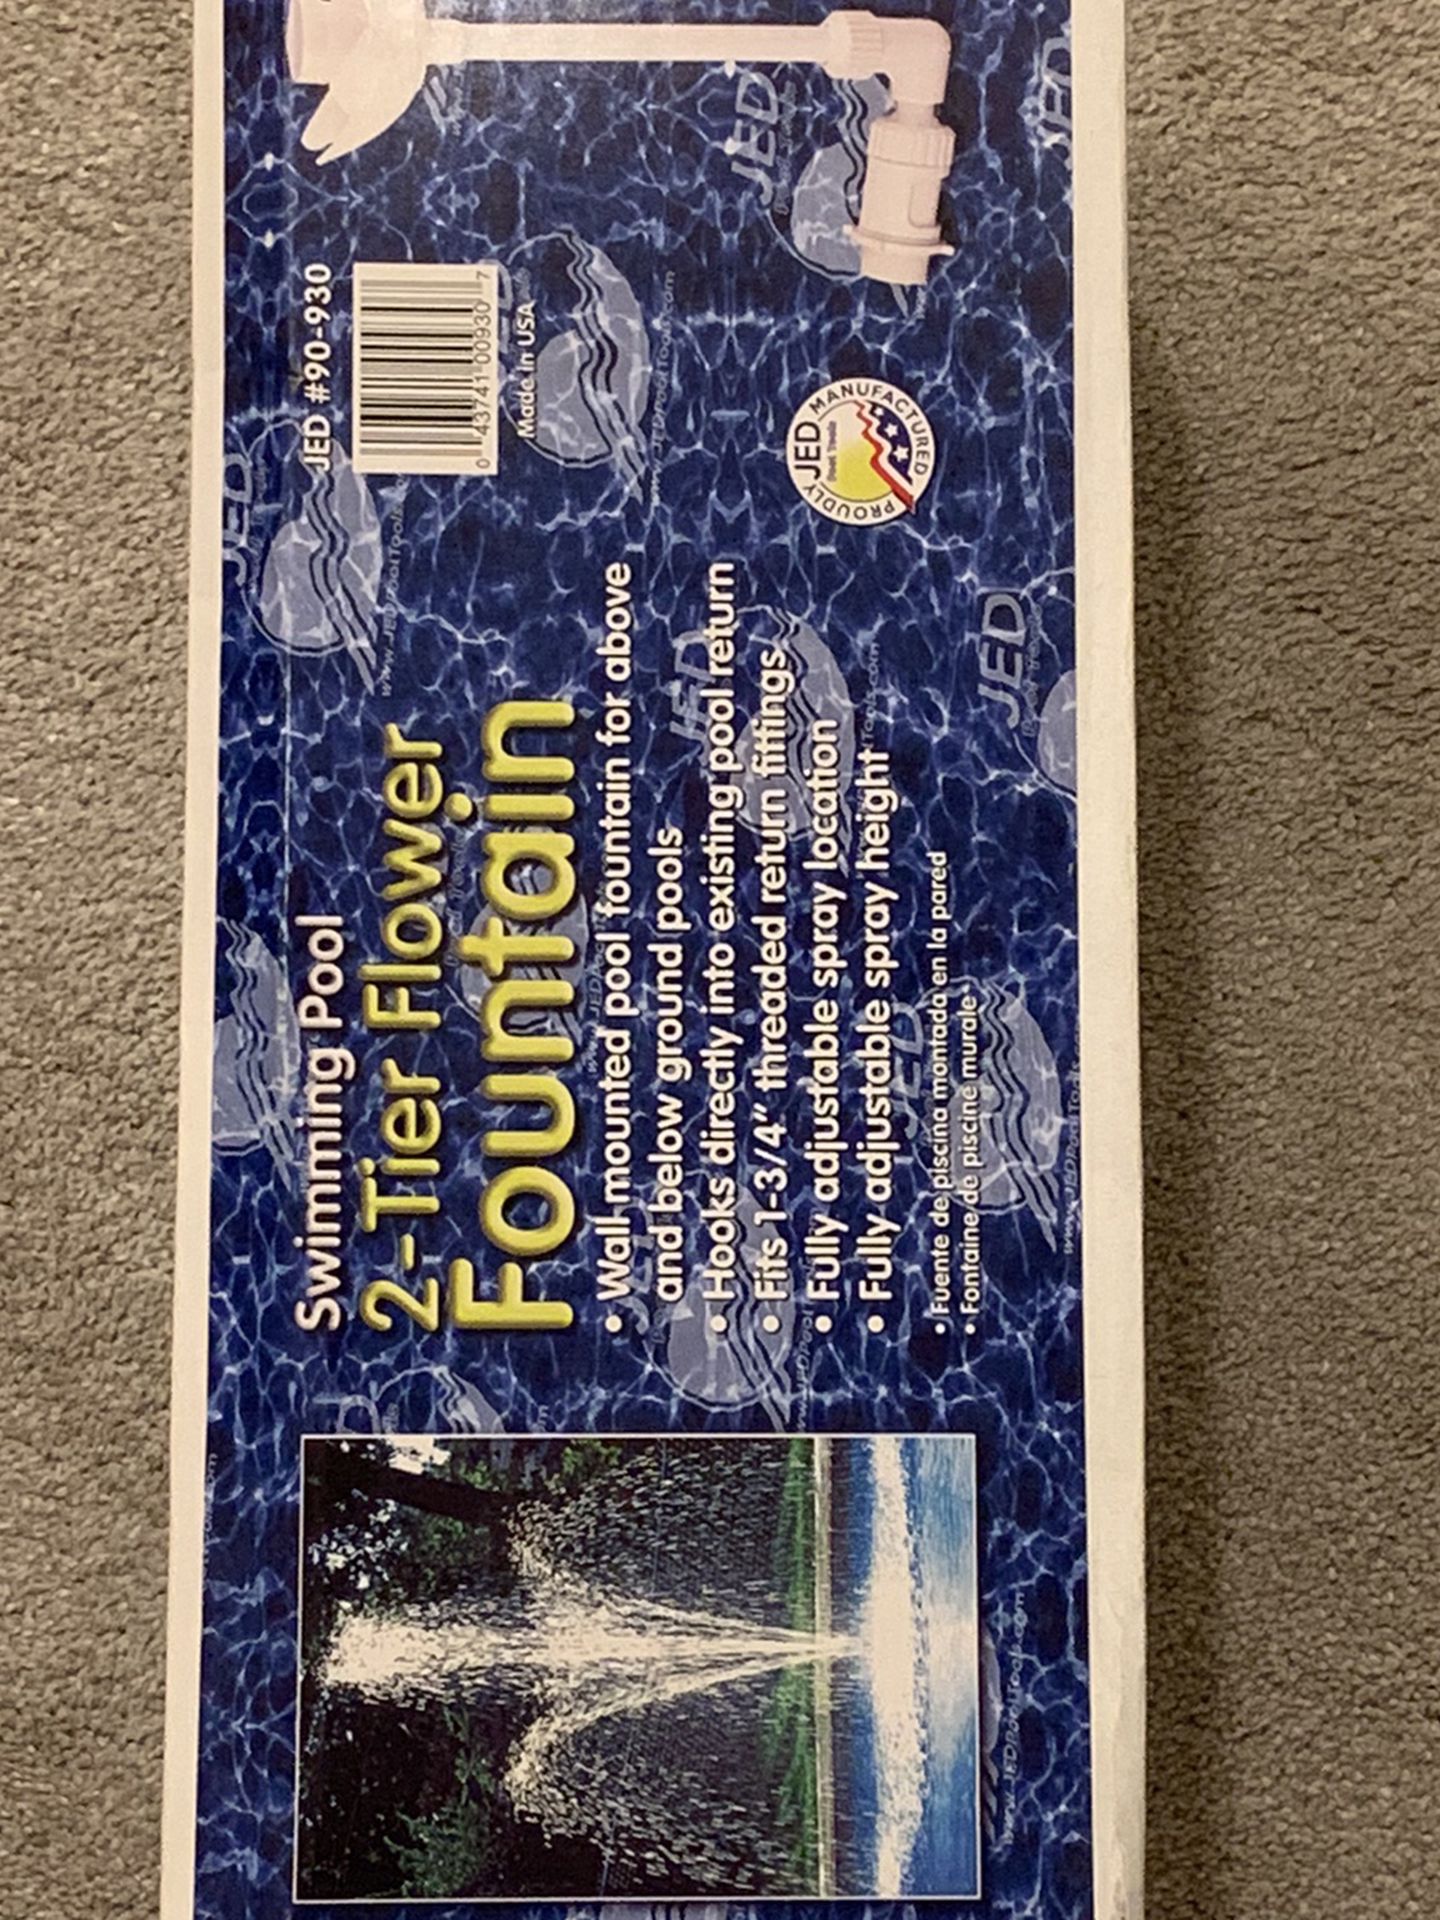 Swimming Pool Fountain New In Box 2 Available